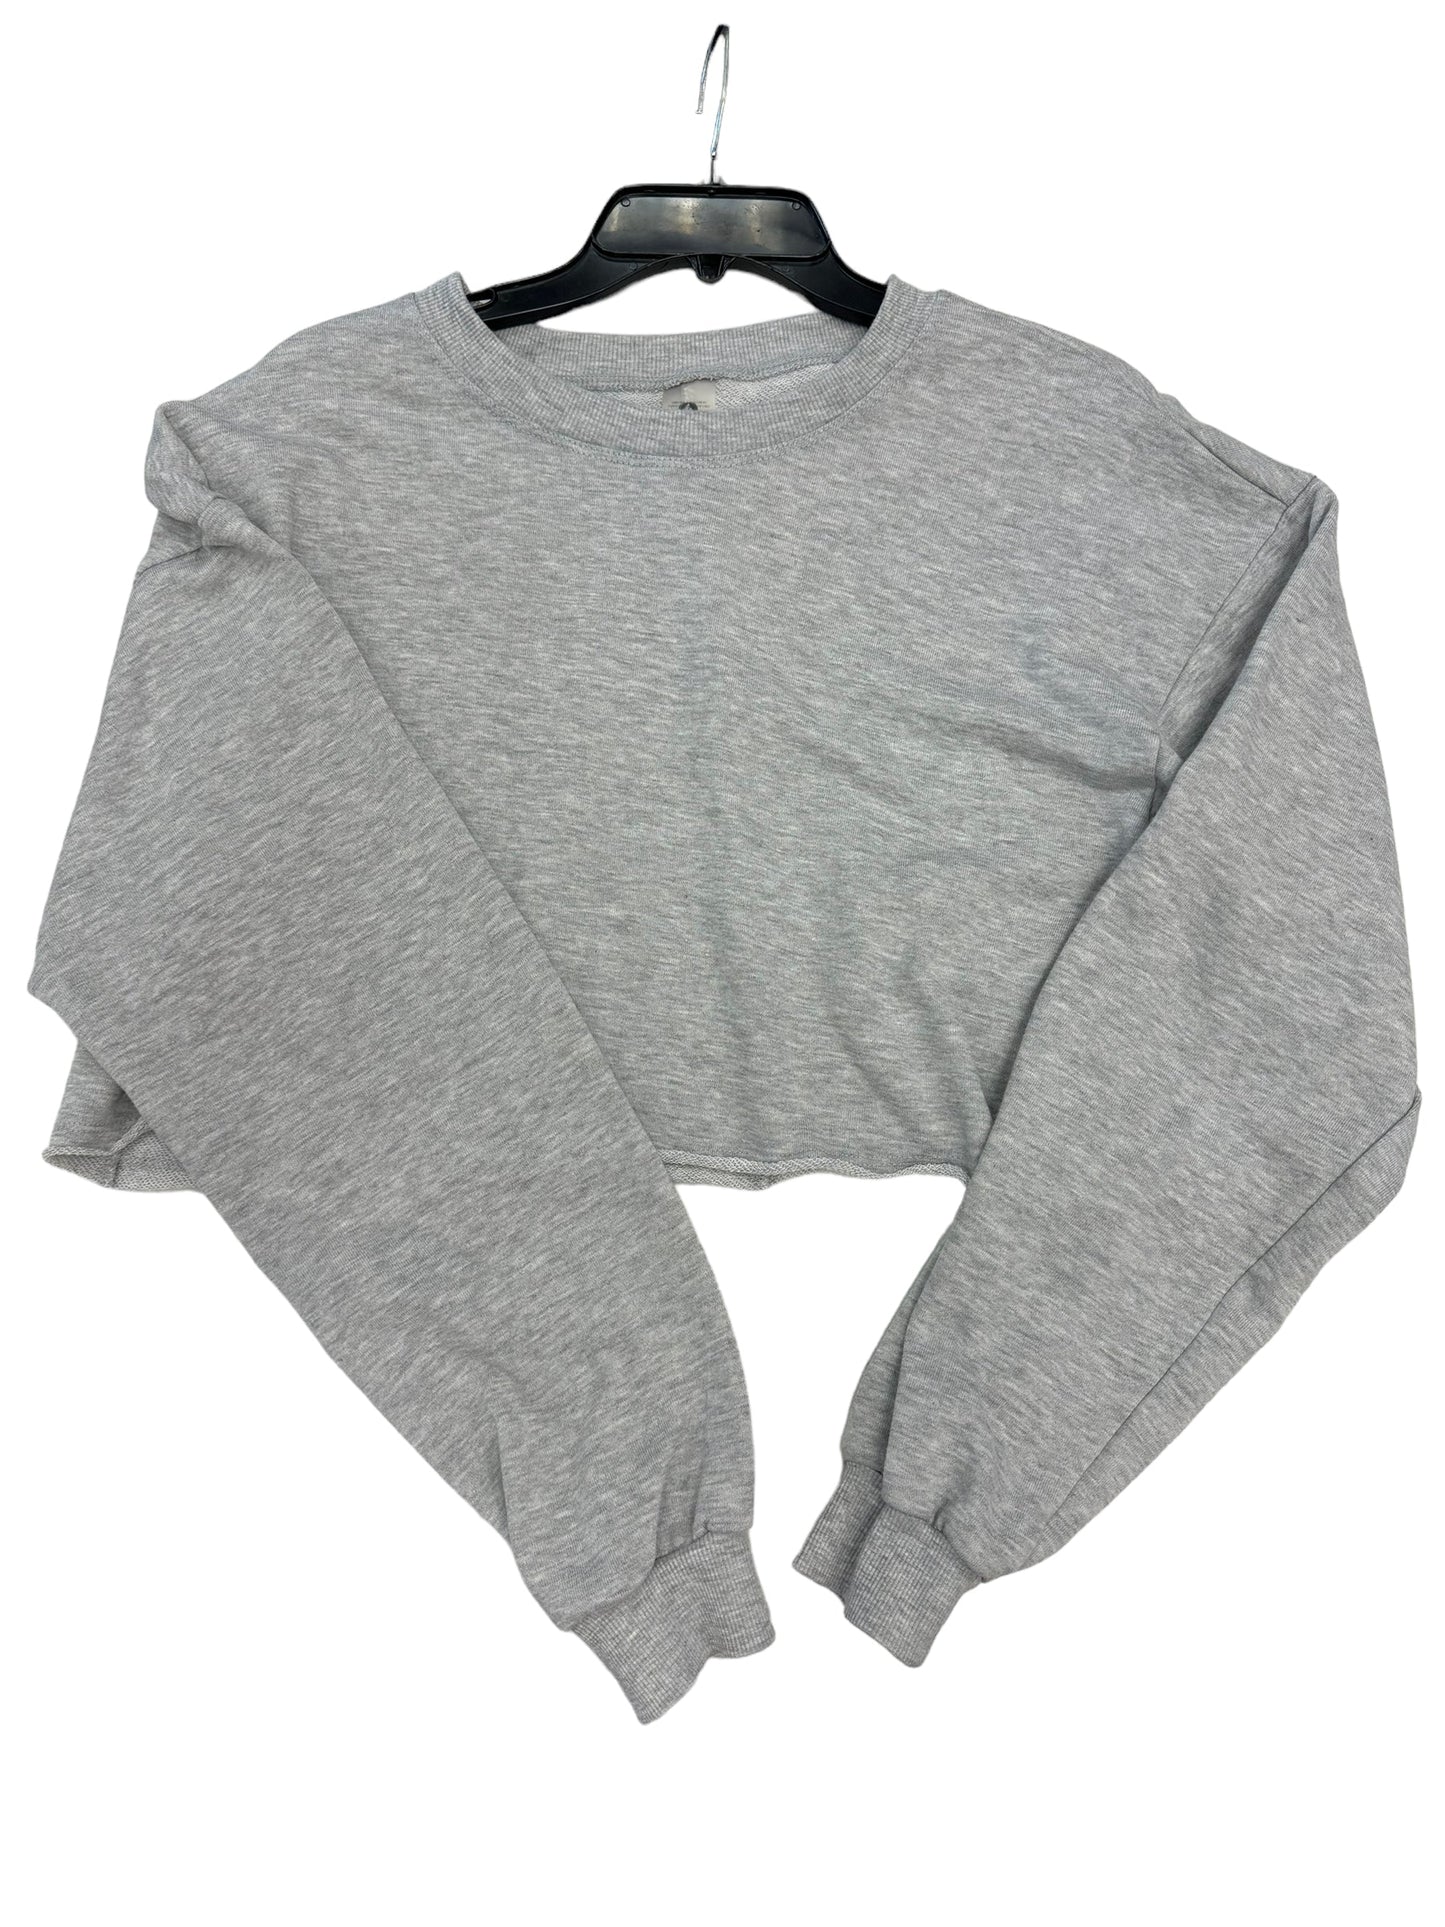 Athletic Top Long Sleeve Crewneck By Mono B  Size: M